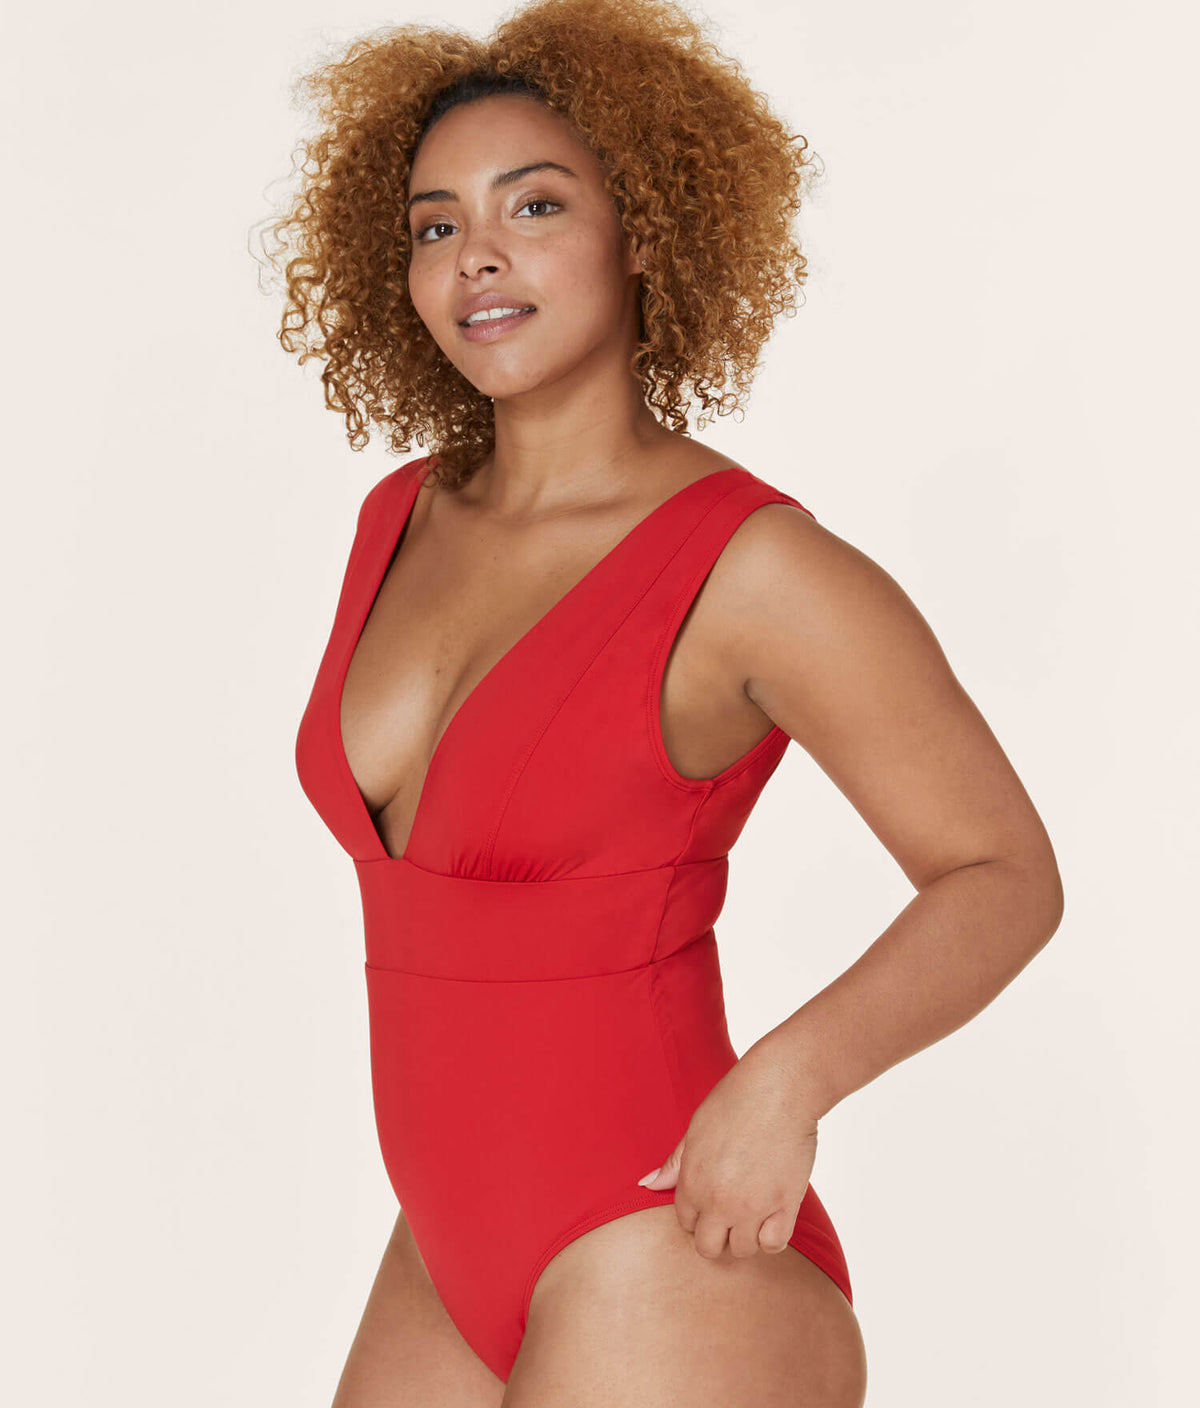 THE HAND LOOM The Mykonos 100% Organic Cotton Womens One Piece - Flat - Cherry Red - Classic